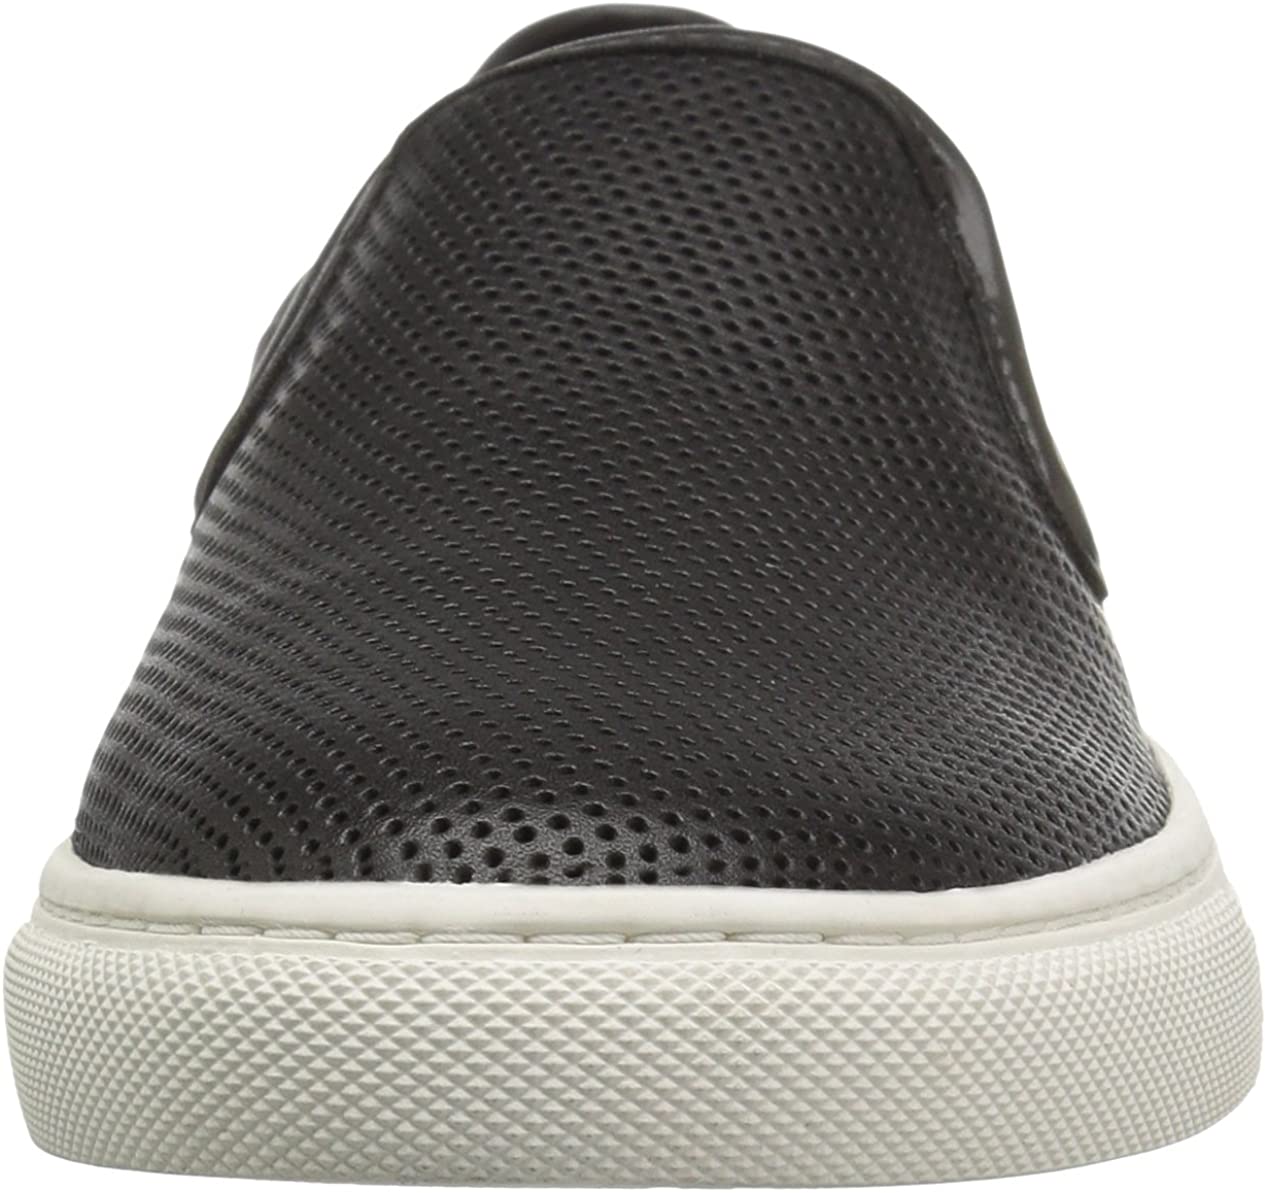 206 Collective Womens Cooper Perforated Slip-on Fashion Sneaker 